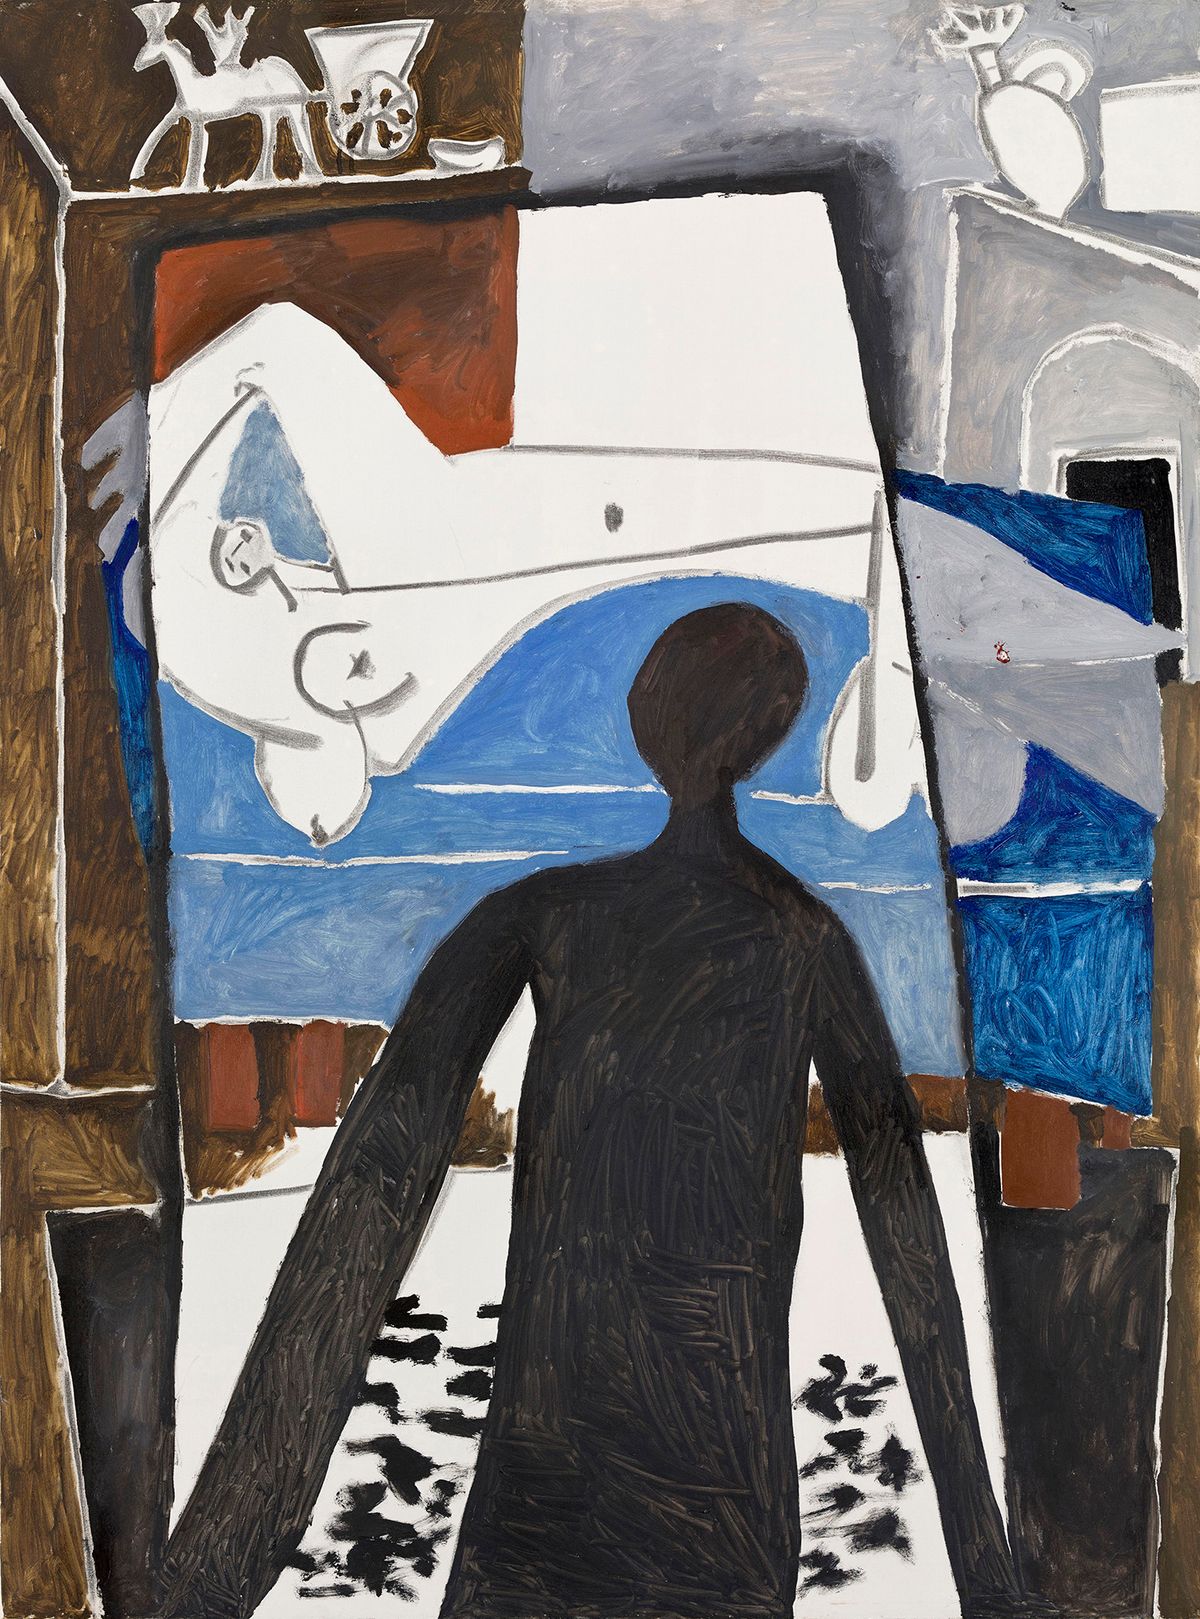 Pablo Picasso'sThe Shadow (December 1953)

Musée national Picasso/Paris/France; MP208. © 2023 Estate of Pablo Picasso / Artists Rights Society (ARS), New York. (Photo: Mathieu Rabeau, © RMN-Grand Palais / Art Resource, New York)